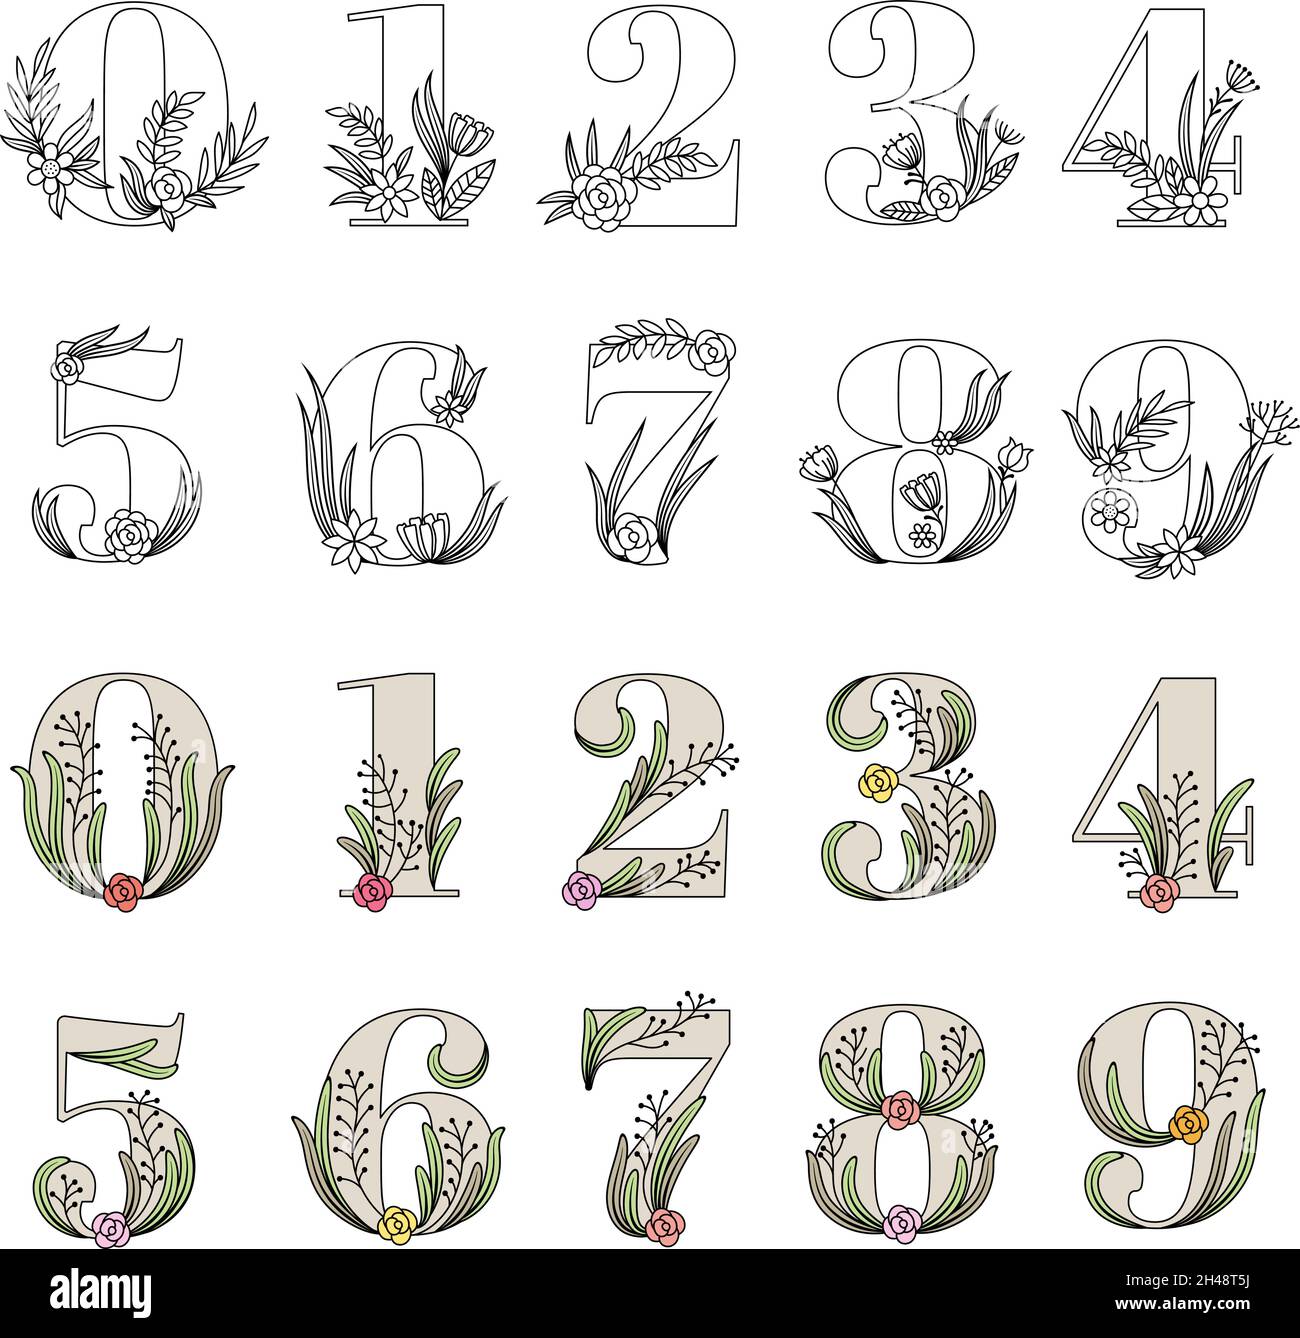 Top 15 Number Fonts for Tattoos: The Intersection of Art and Numbers in Tattoos